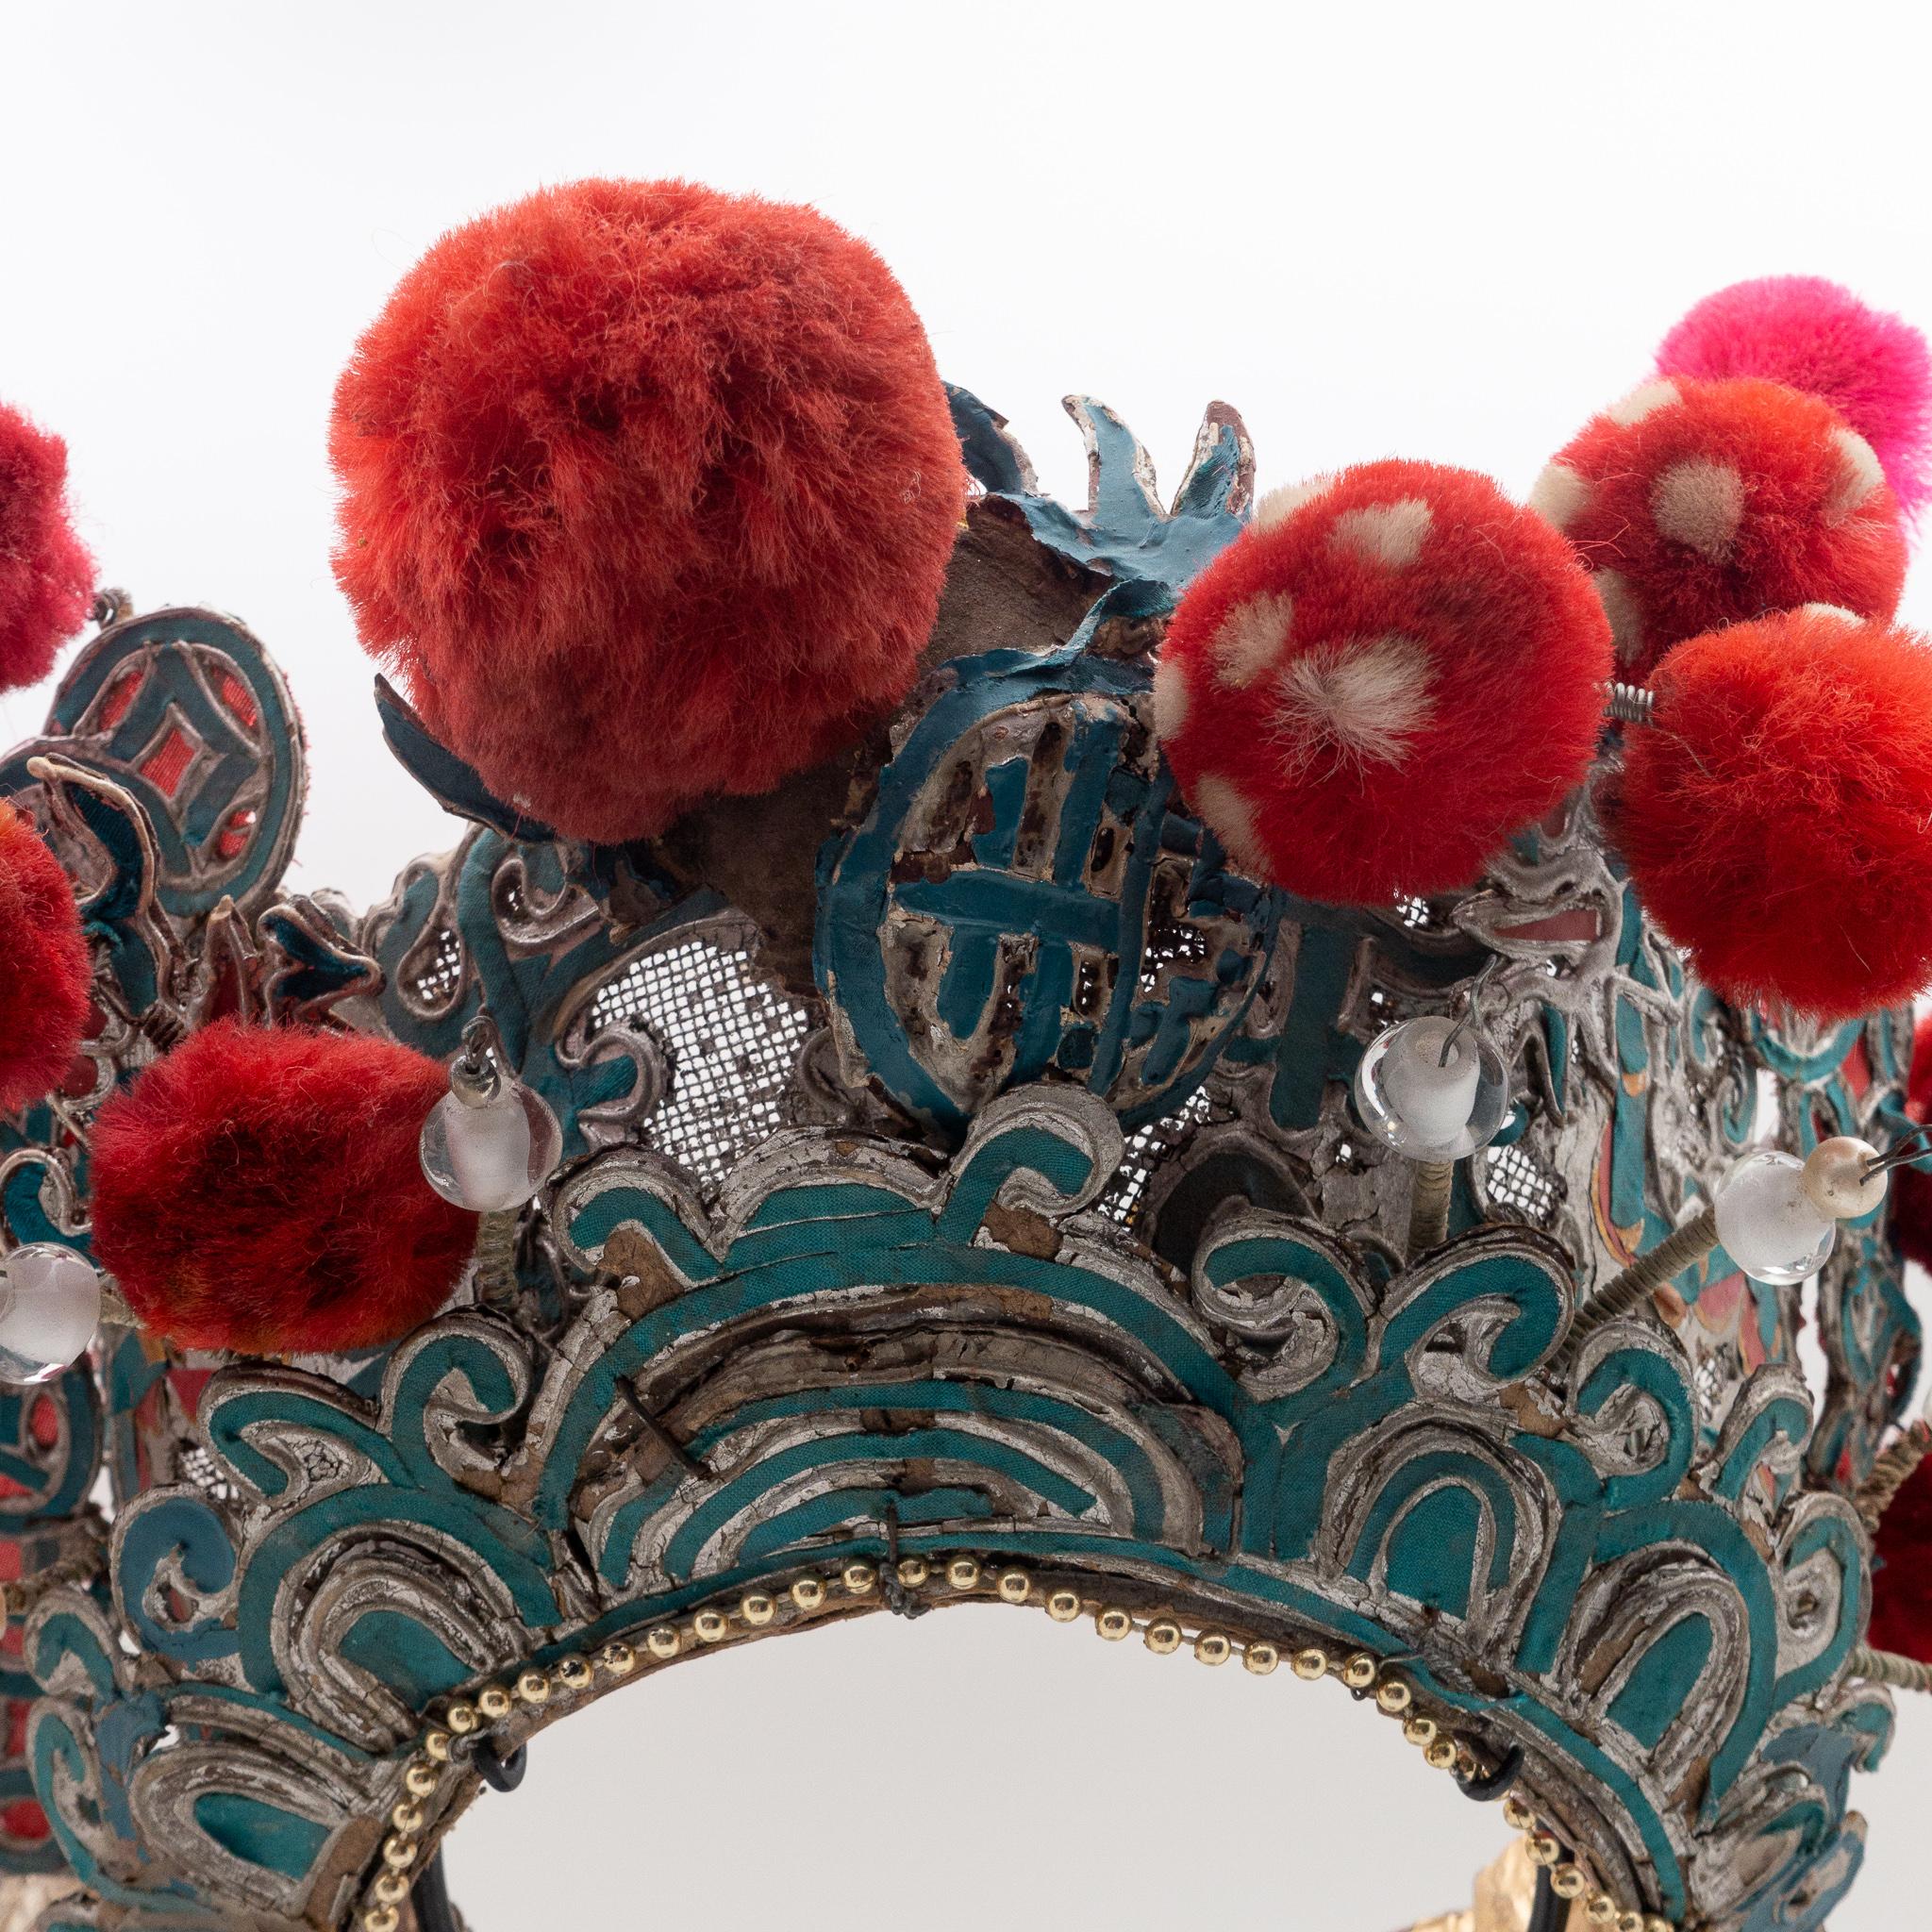 Antique Chinese Theatre Opera Headdress, Turquoise/Silver, Red/Fuchsia Pom-Poms 1